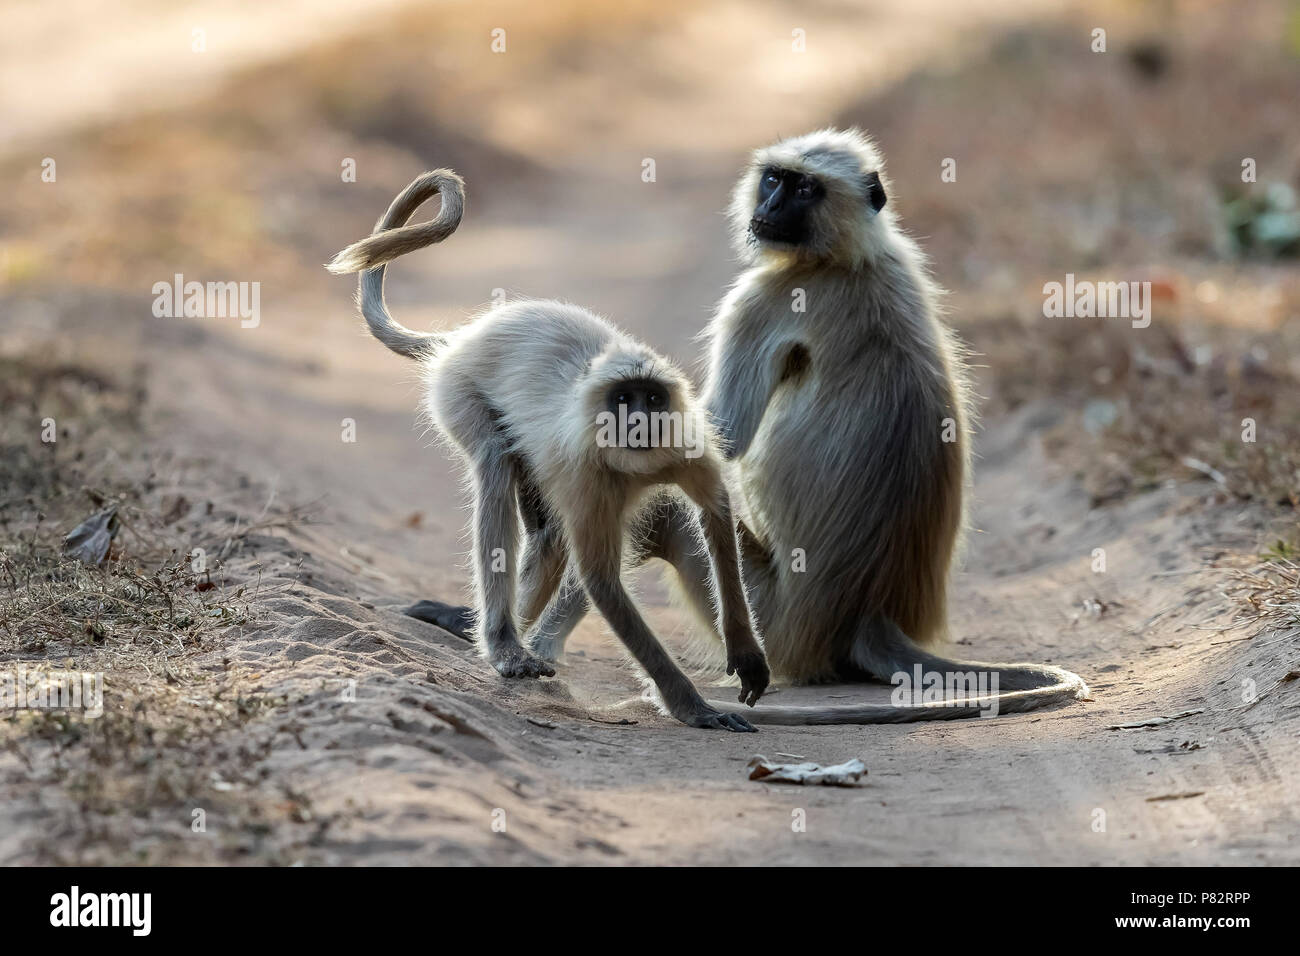 Adult & juvenile Northern Plains Langur running on a track in Bandavgarh NP, India. March 2017. Stock Photo